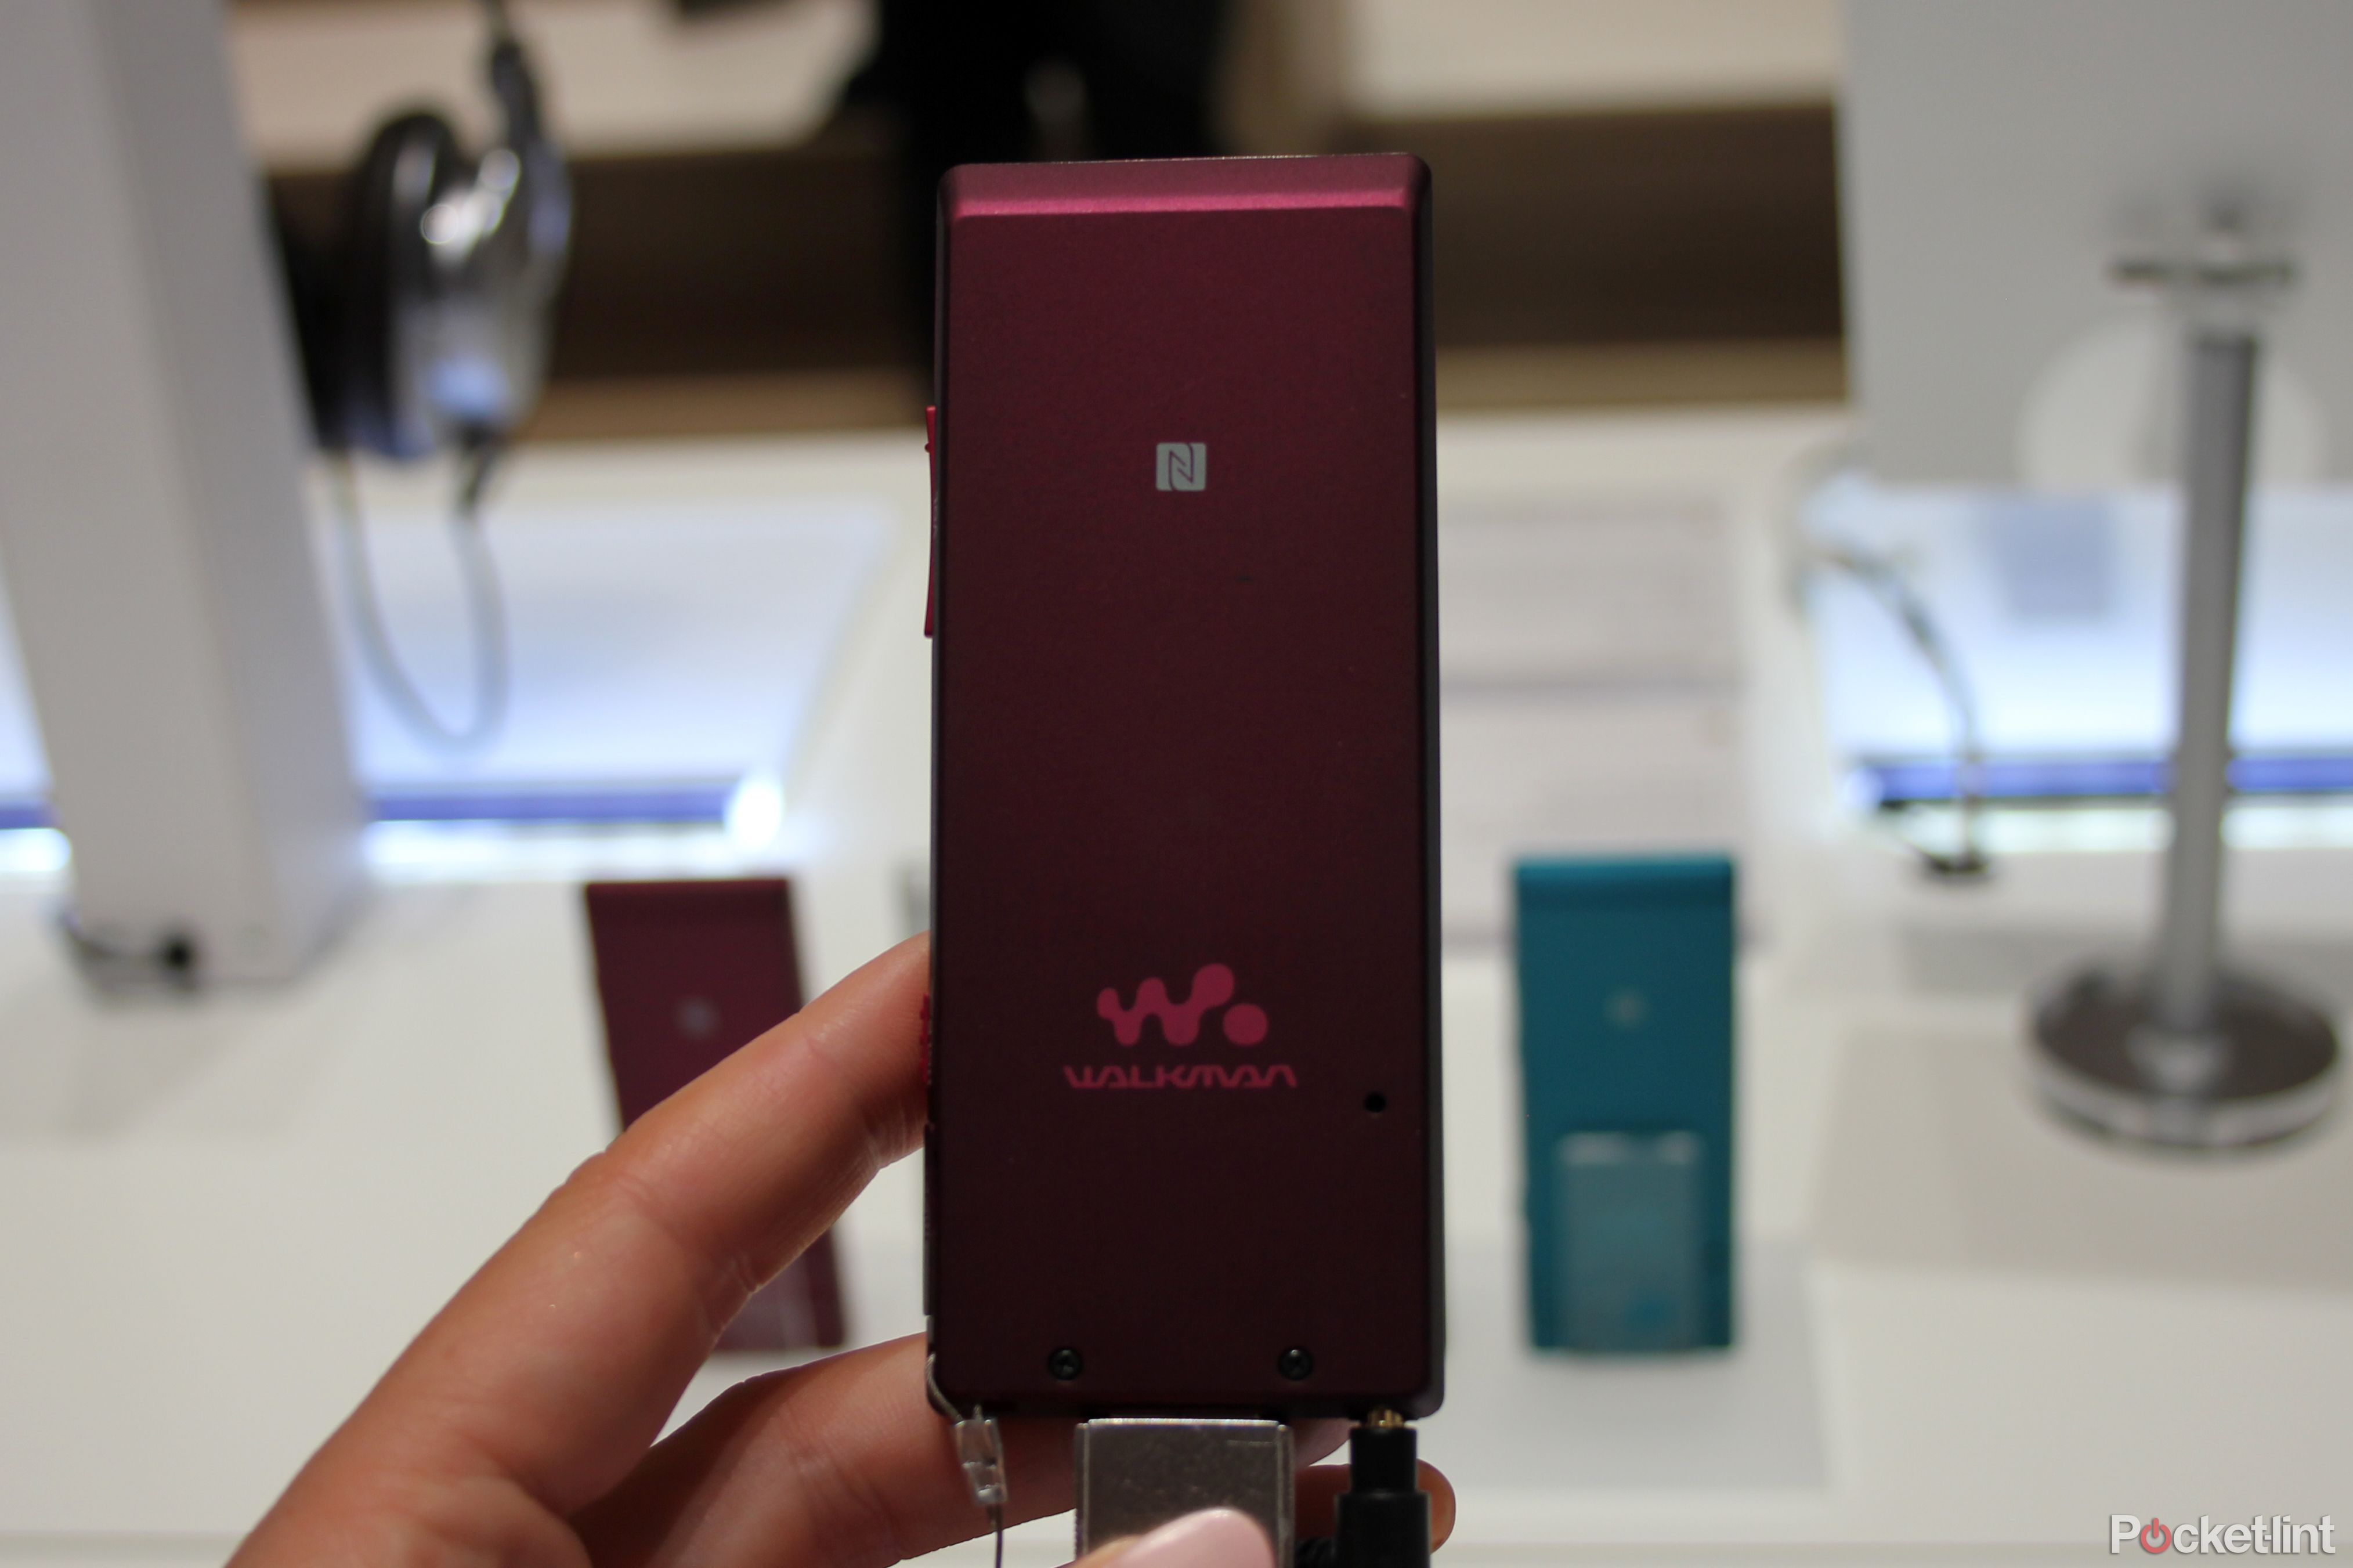 sony nwz a15 walkman is a super cute portable high res music player hands on image 4